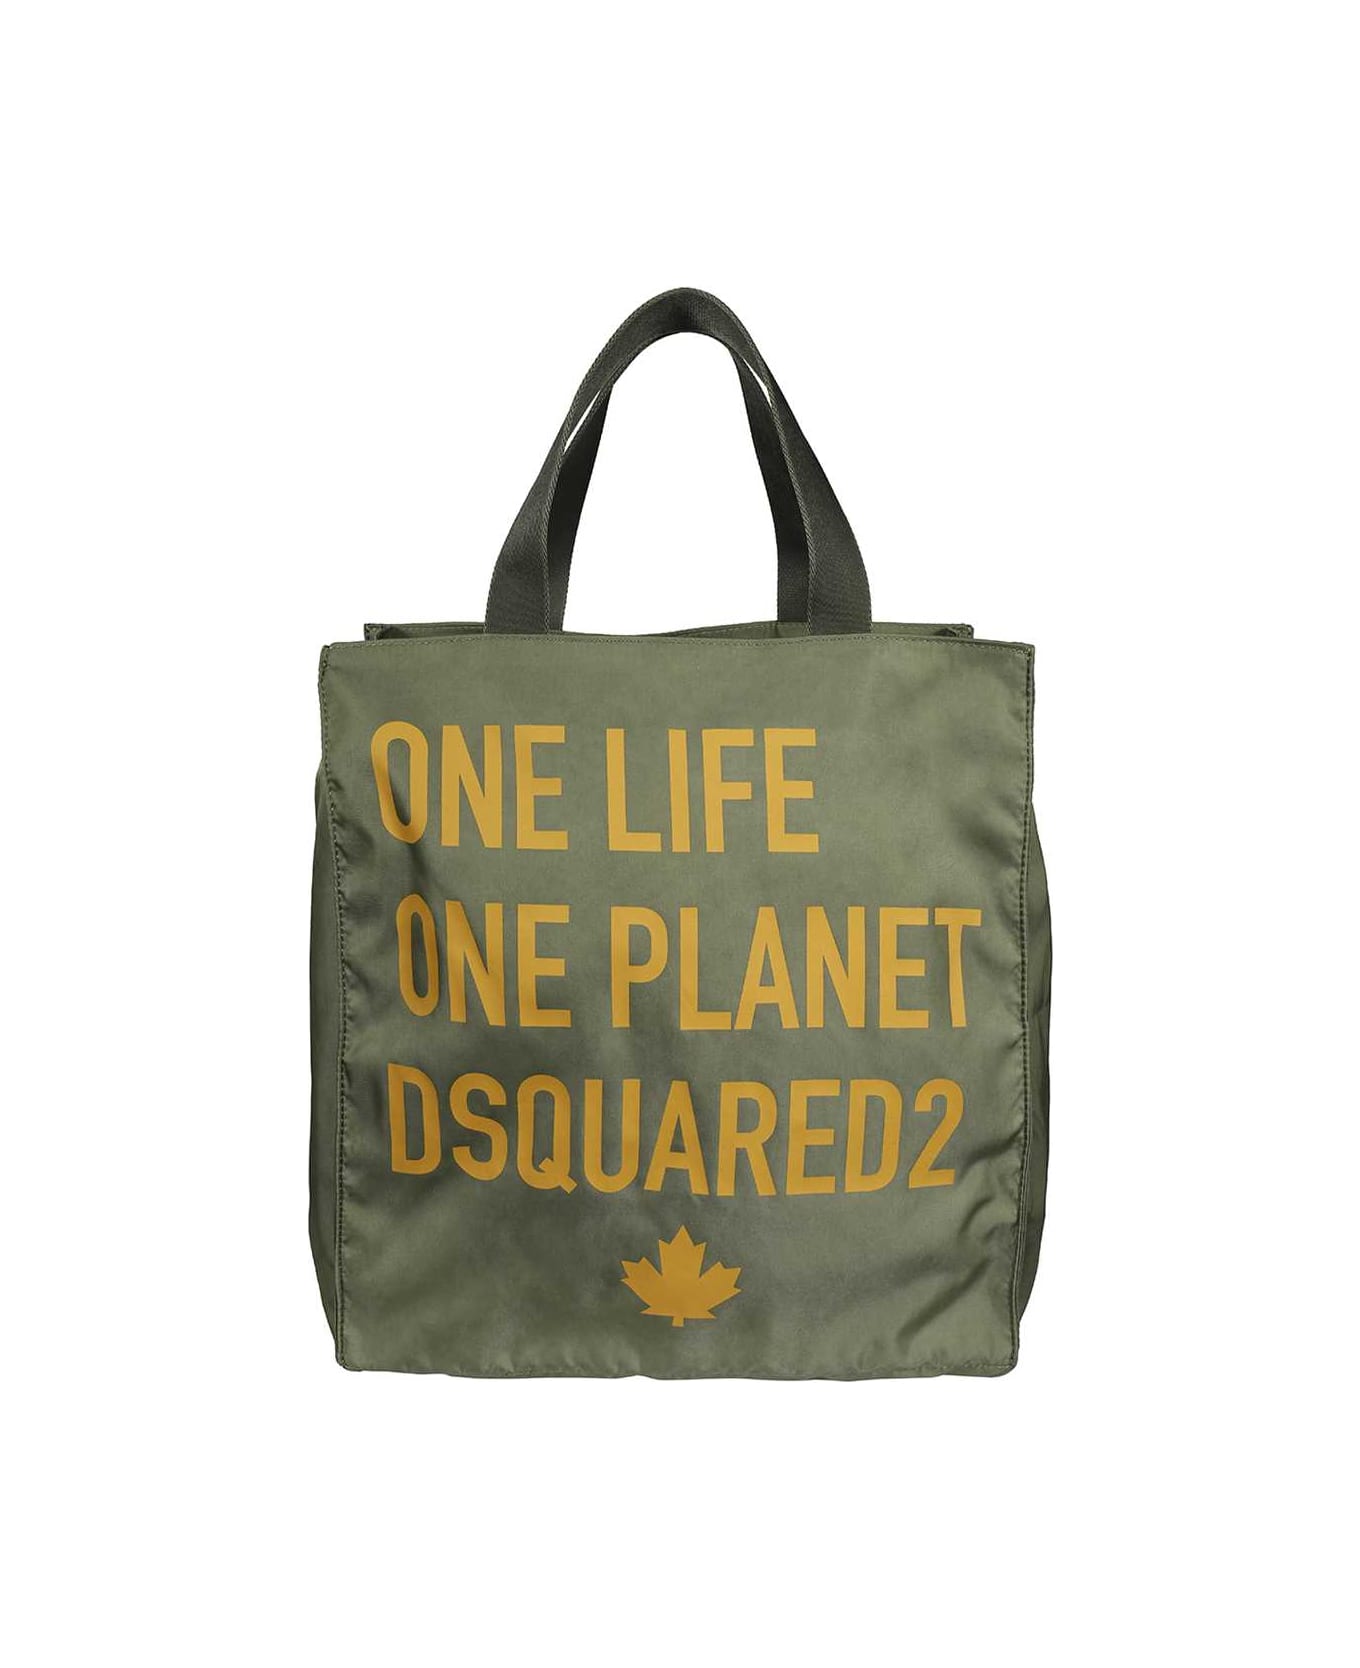 Dsquared2 Tote Bag - green トートバッグ